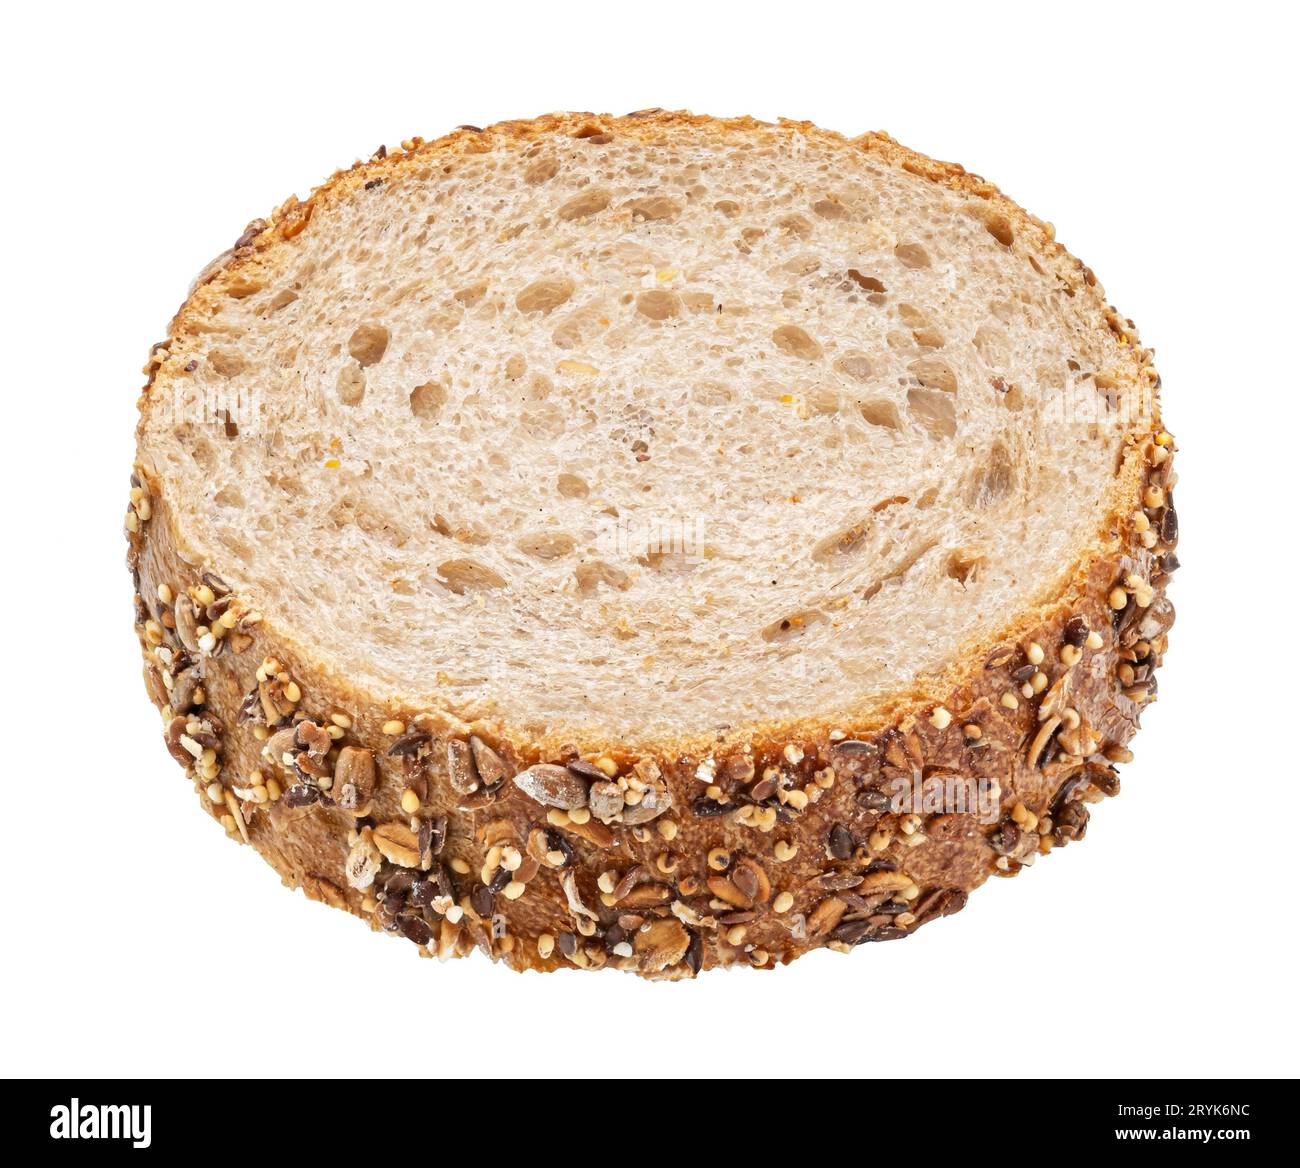 Wholegrain bread slice with oats isolated on white background, top view Stock Photo